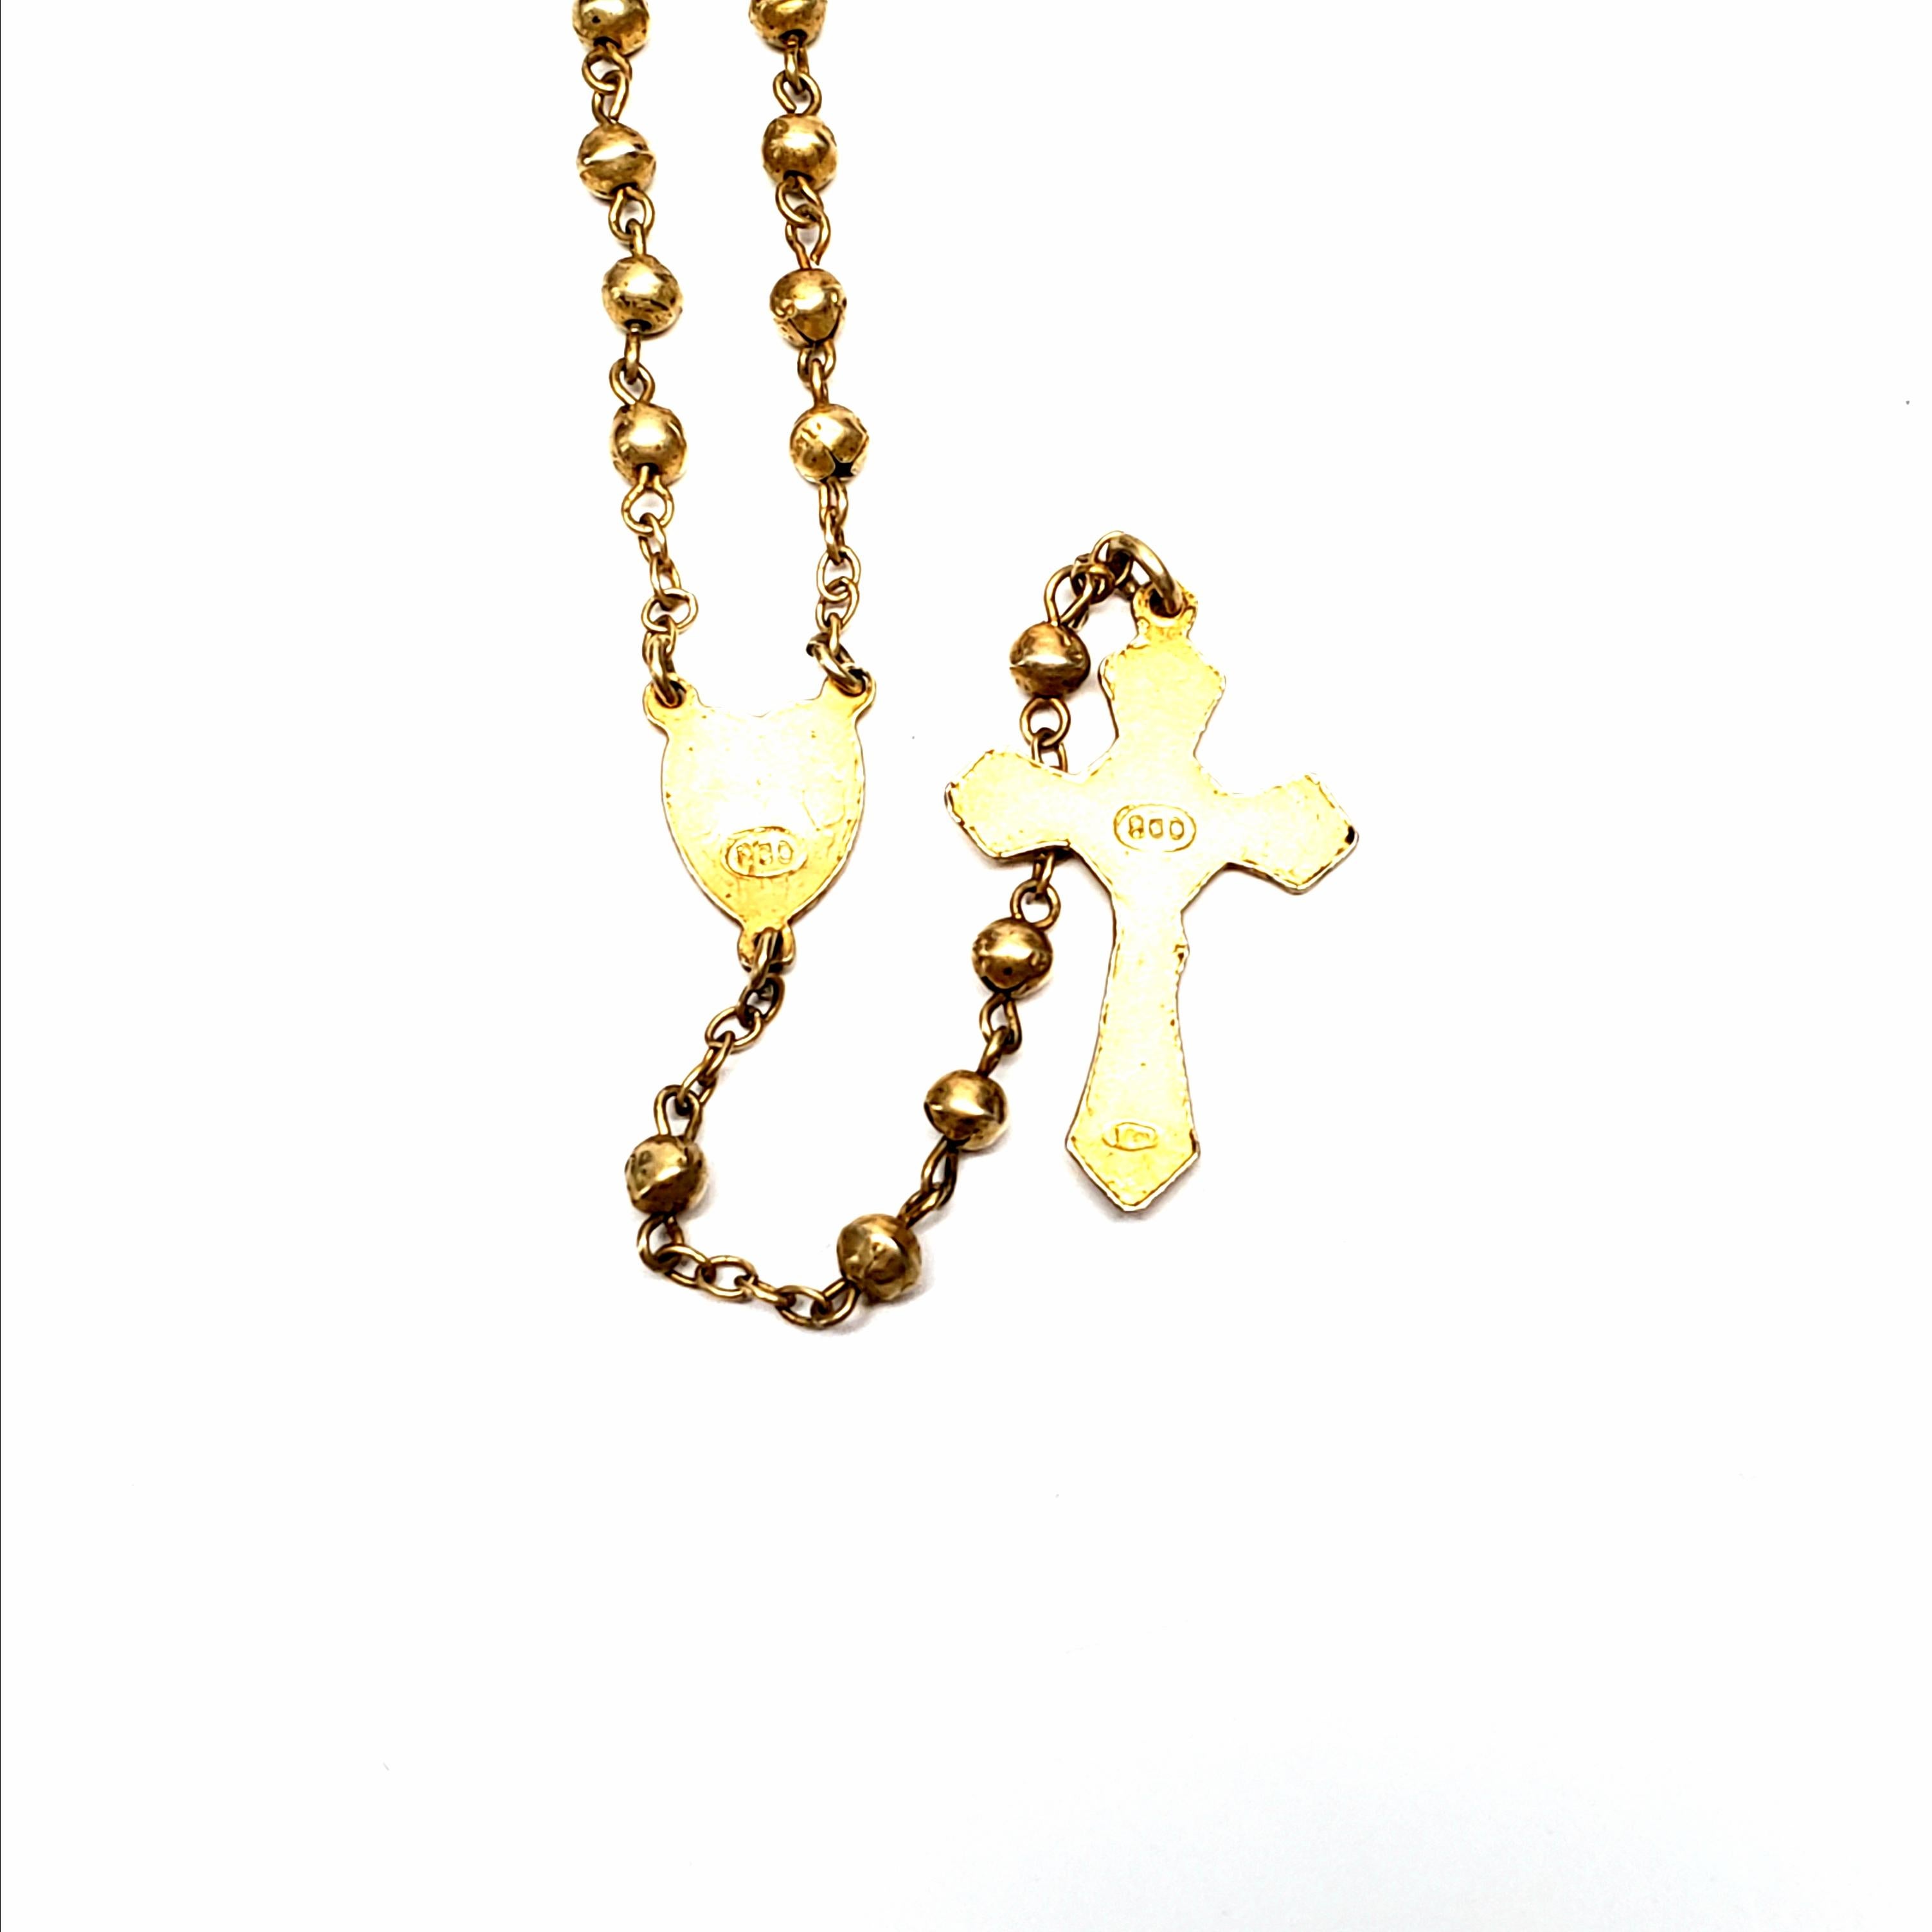 Gold Vermeil Over 800 Silver Rosary with Round Filigree Box Pendant 6